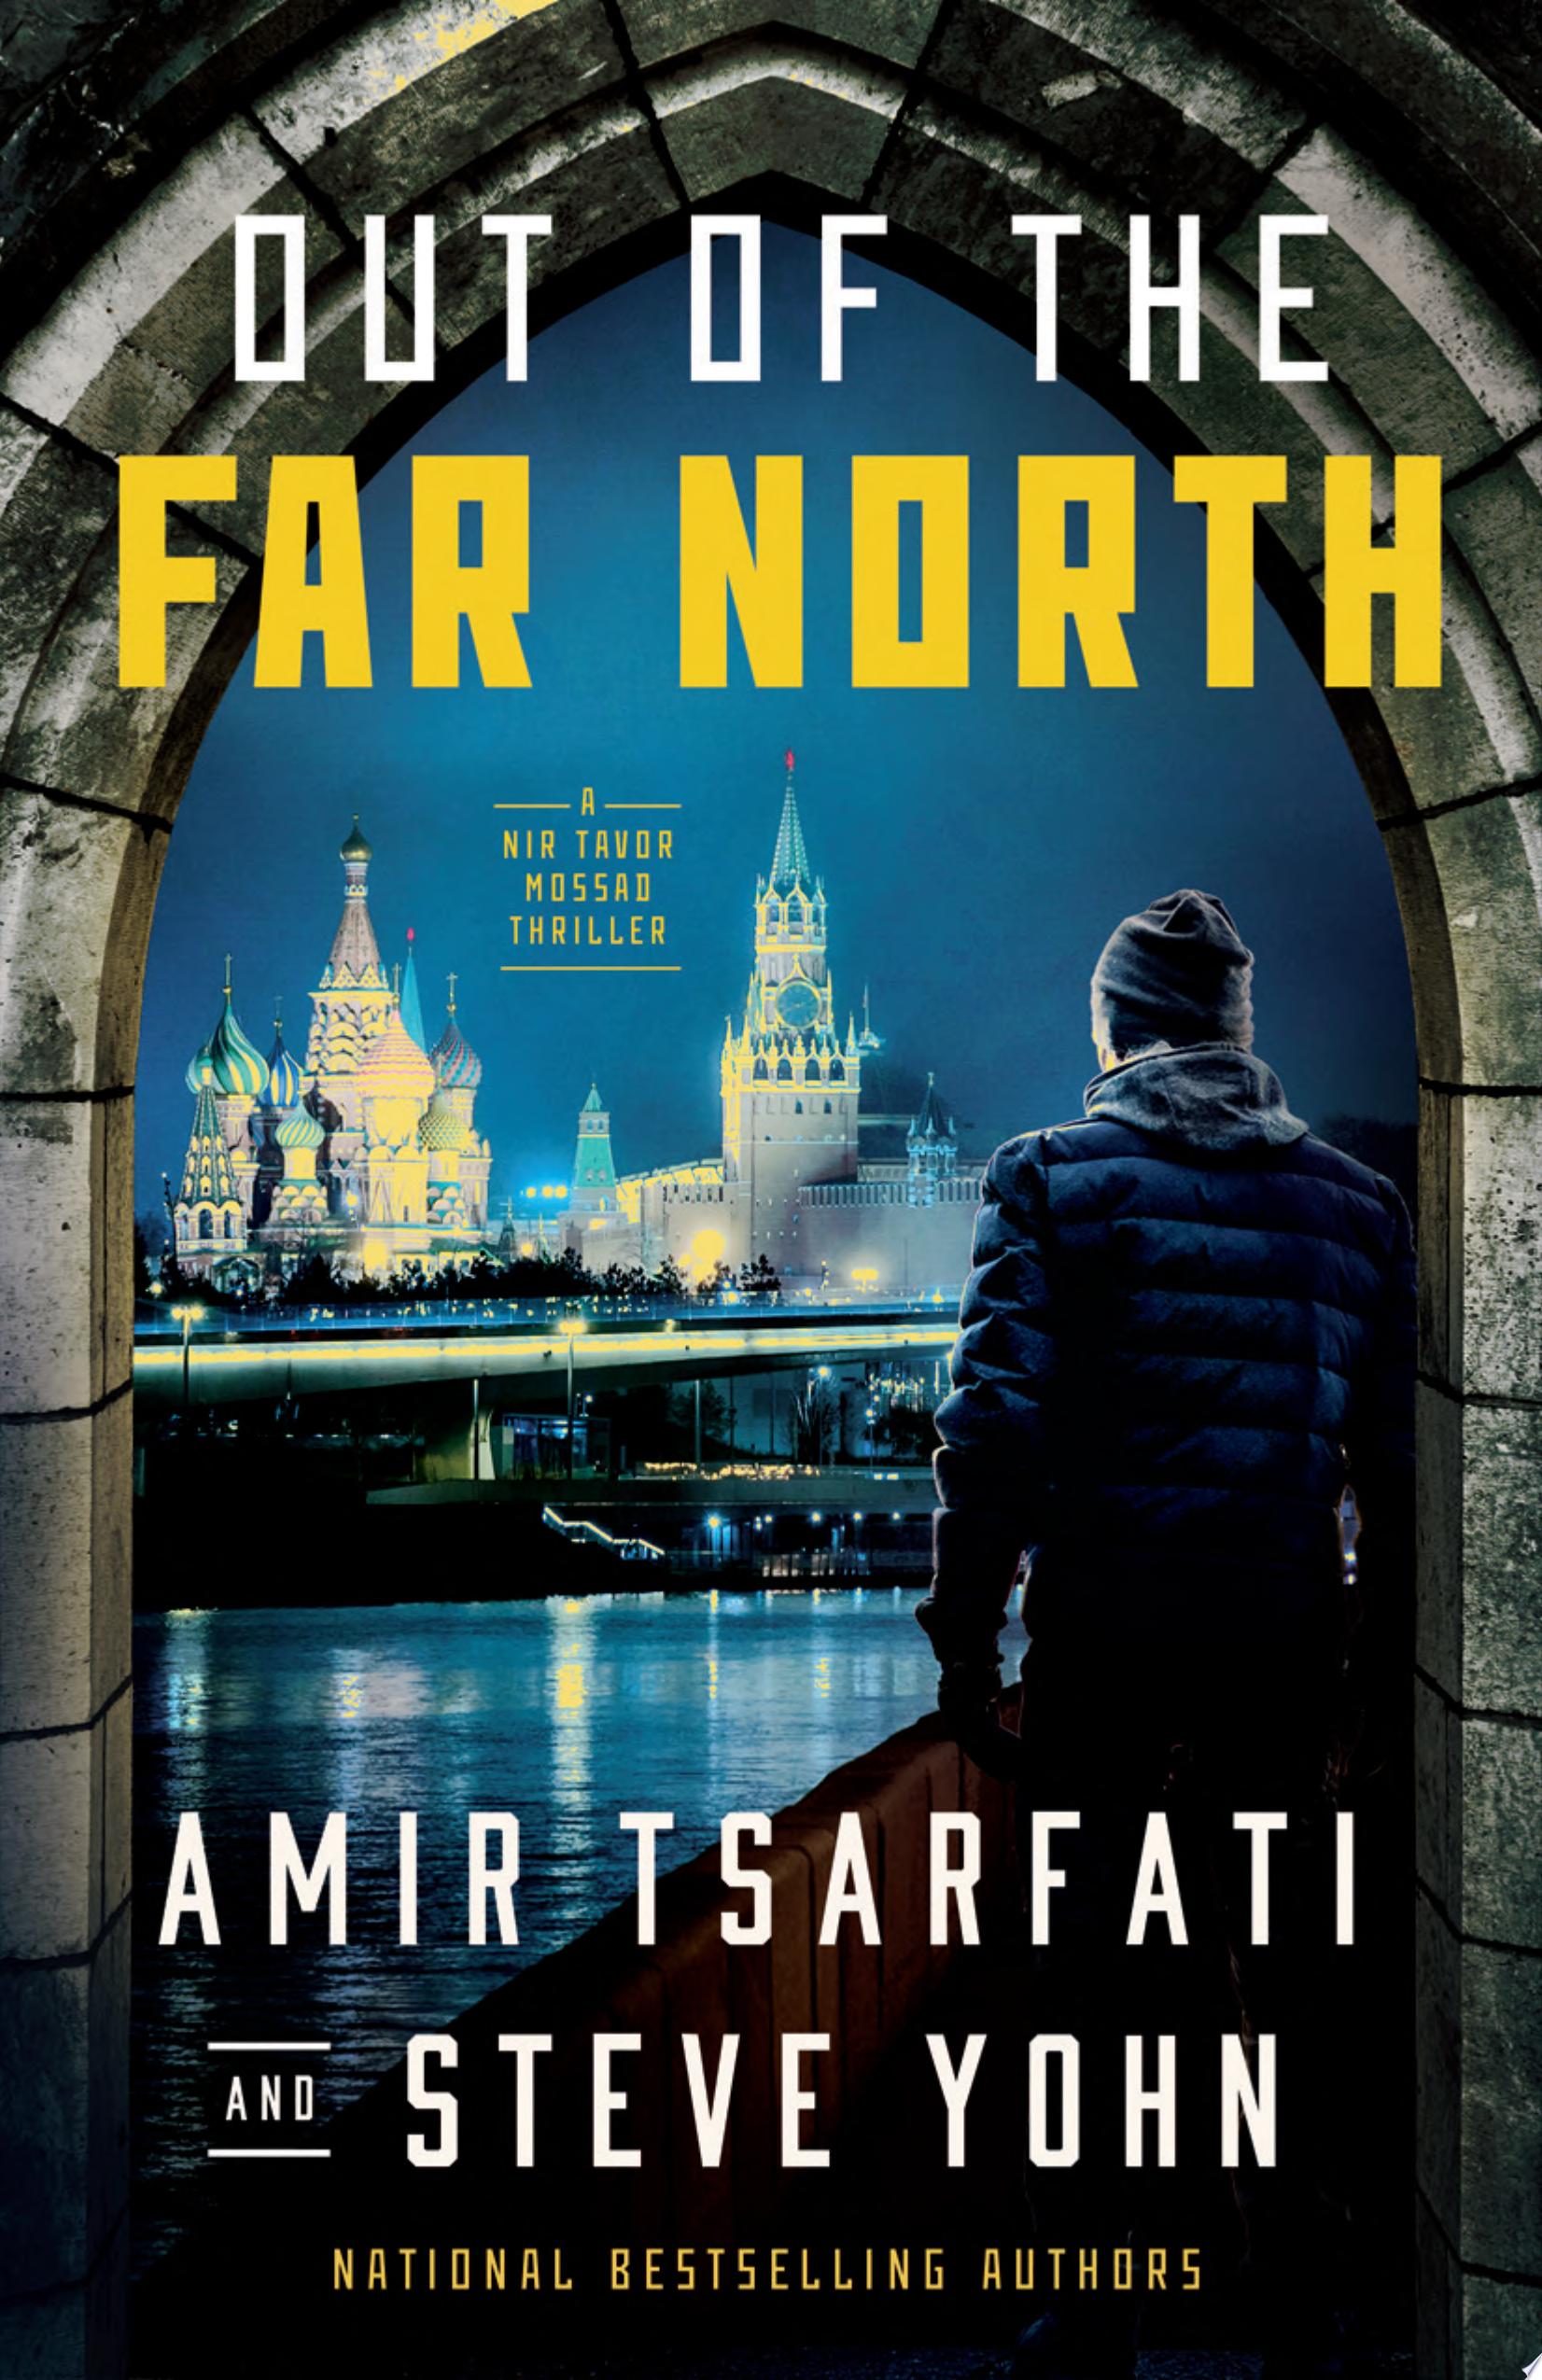 Image for "Out of the Far North"